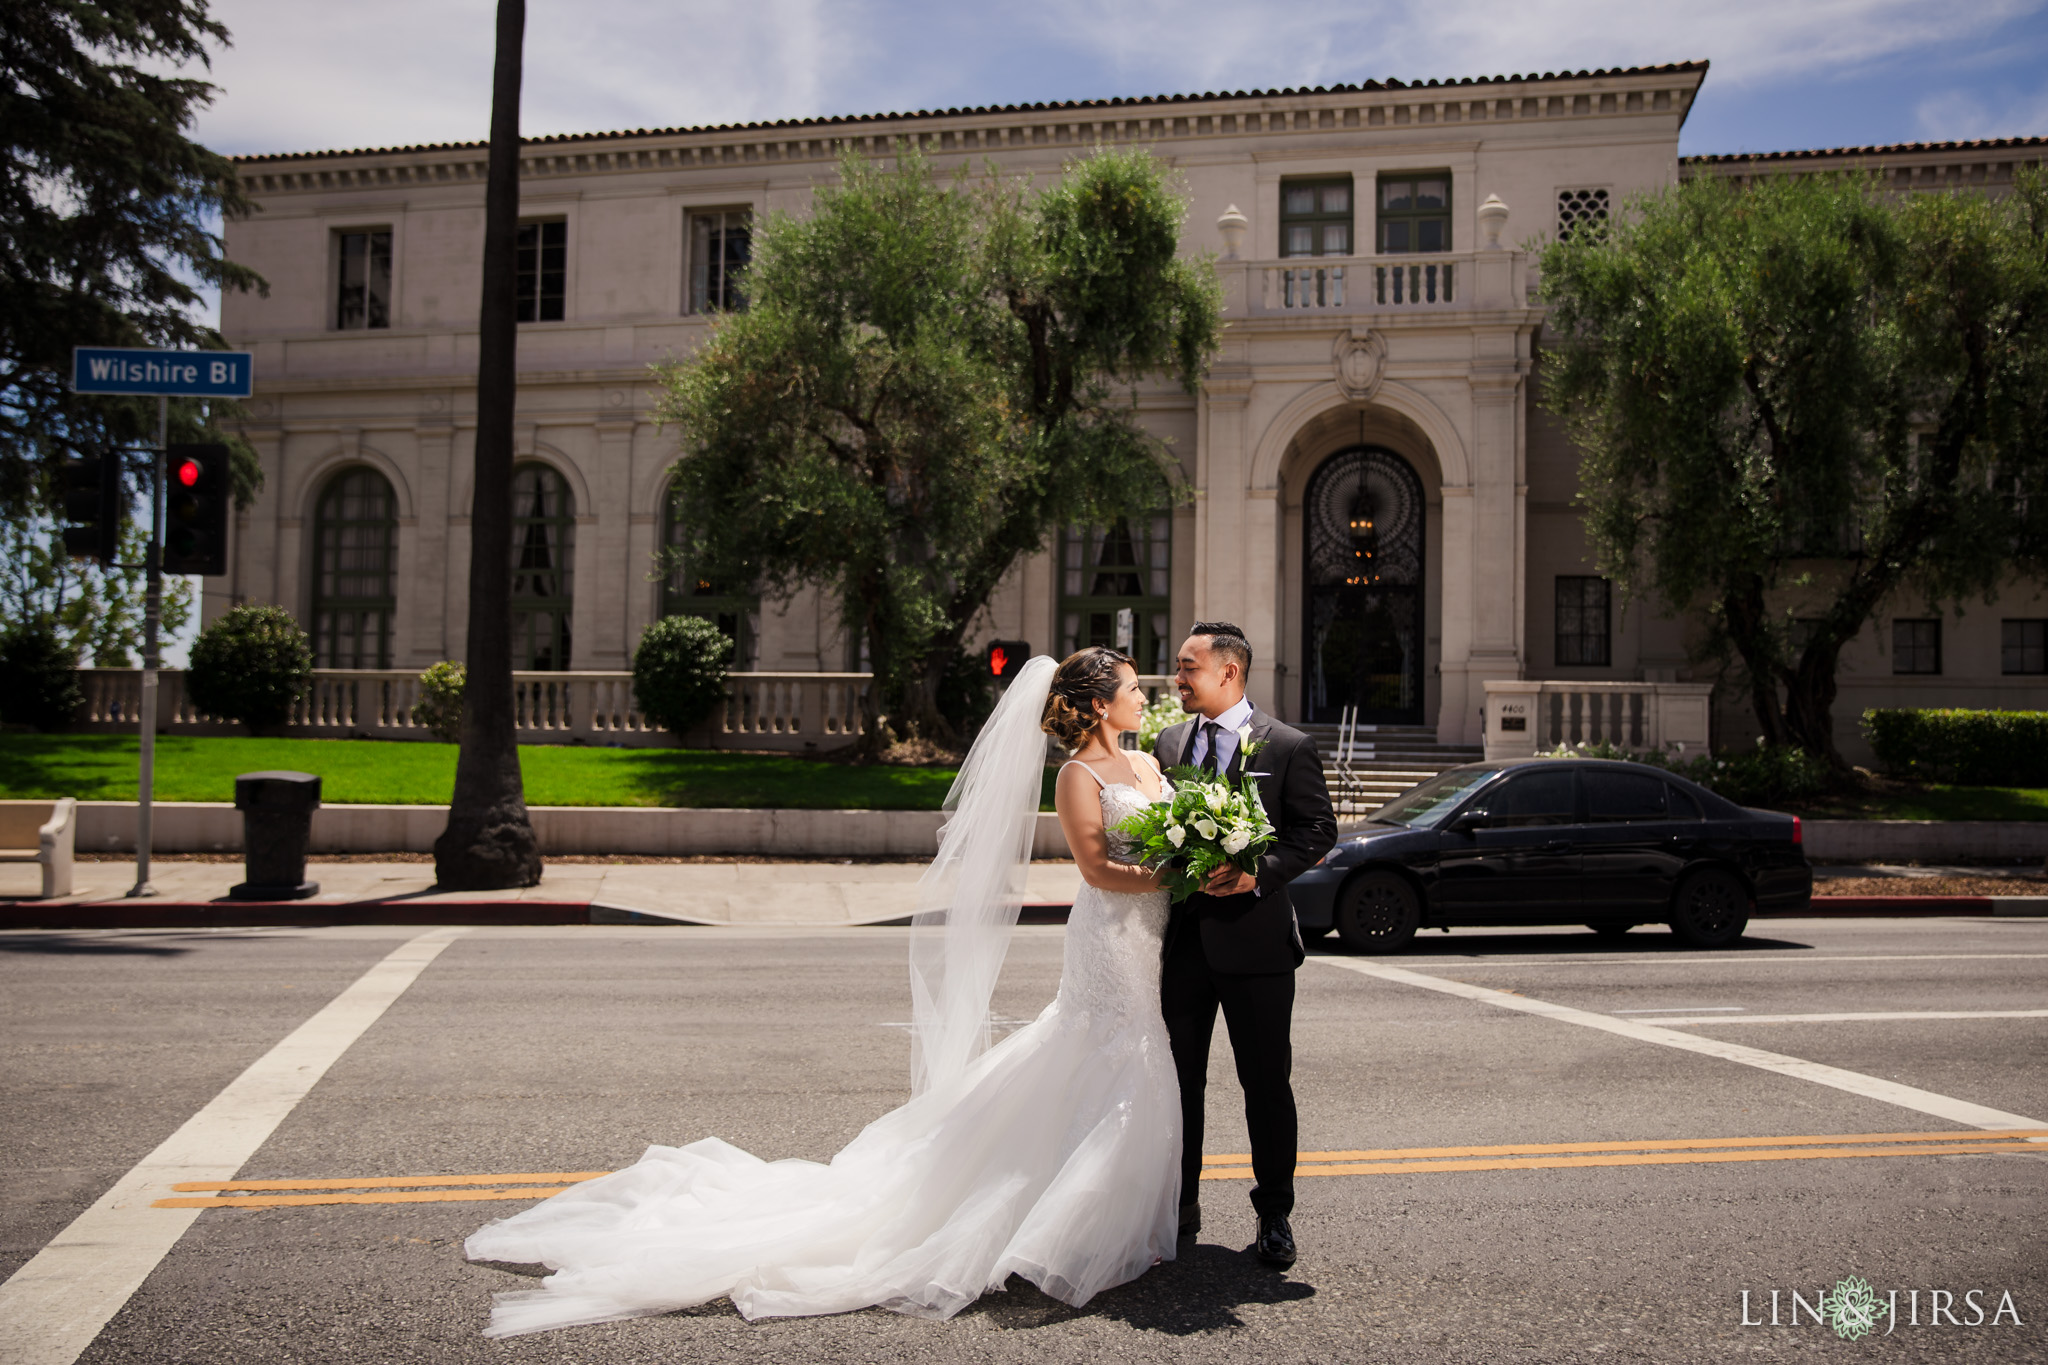 030 wilshire ebell theatre los angeles wedding photography